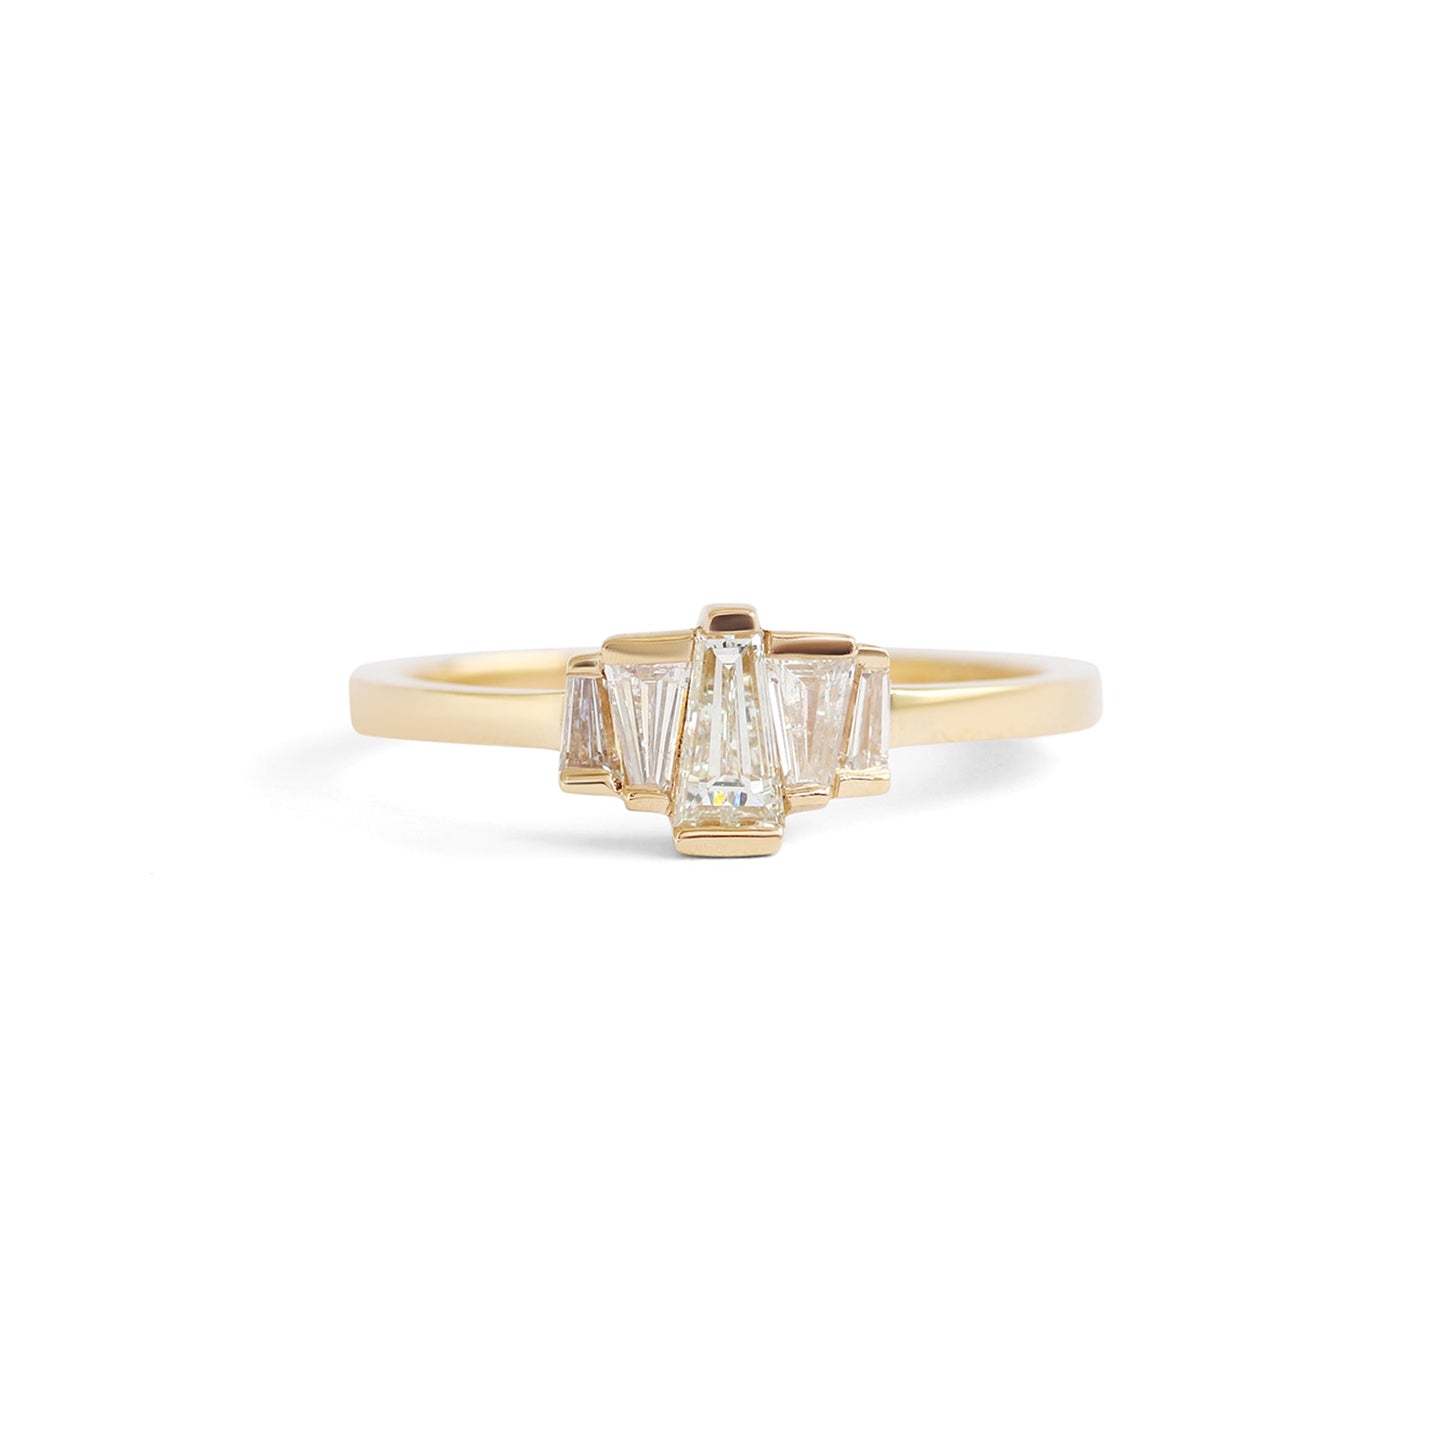 Mirrors Ring / Baguette Diamonds .5ct - Goldpoint Studio - Greenpoint, Brooklyn - Fine Jewelry